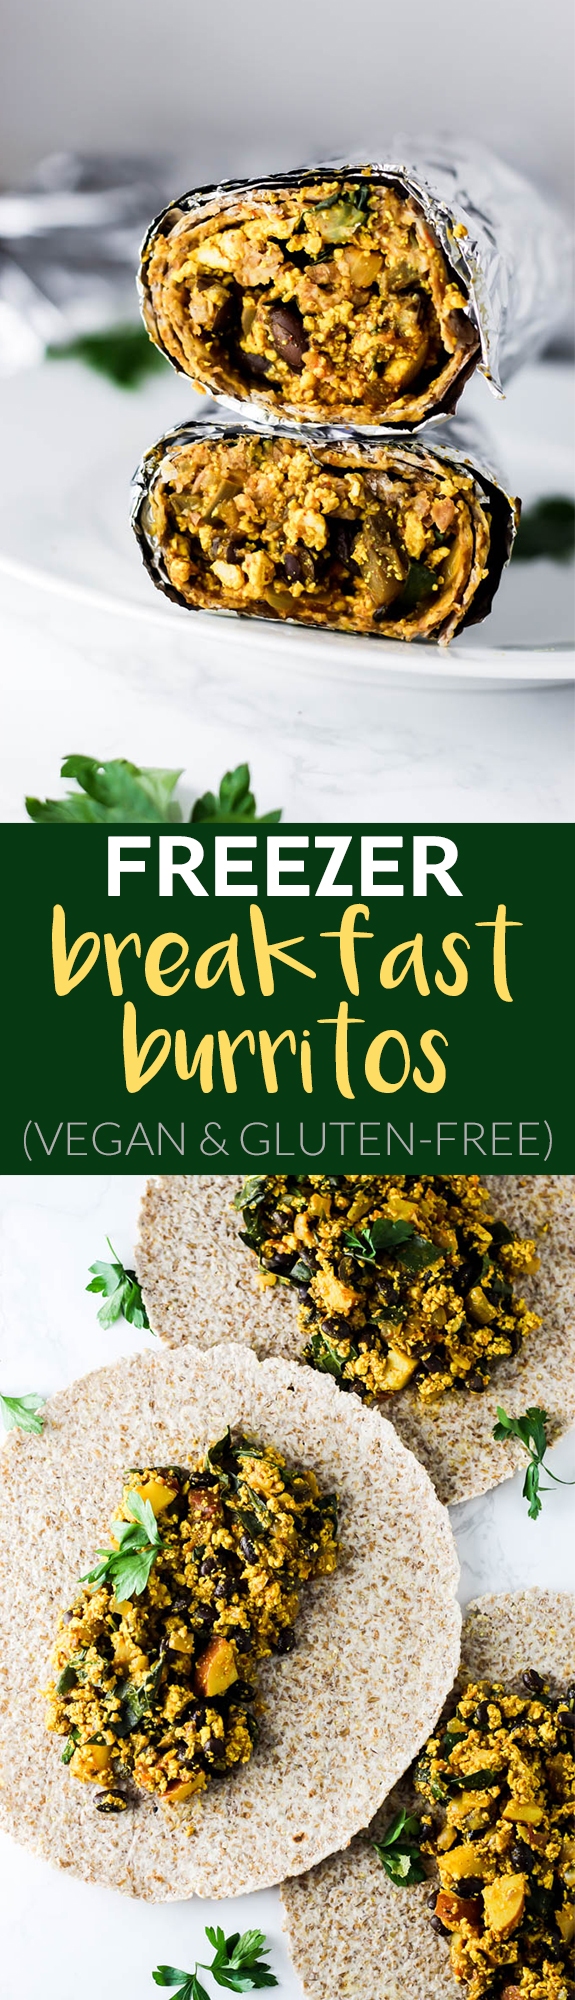 Save time in the morning by grabbing a prepped Vegan Breakfast Burrito from the freezer! It's full of protein to keep you satisfied during busy mornings.